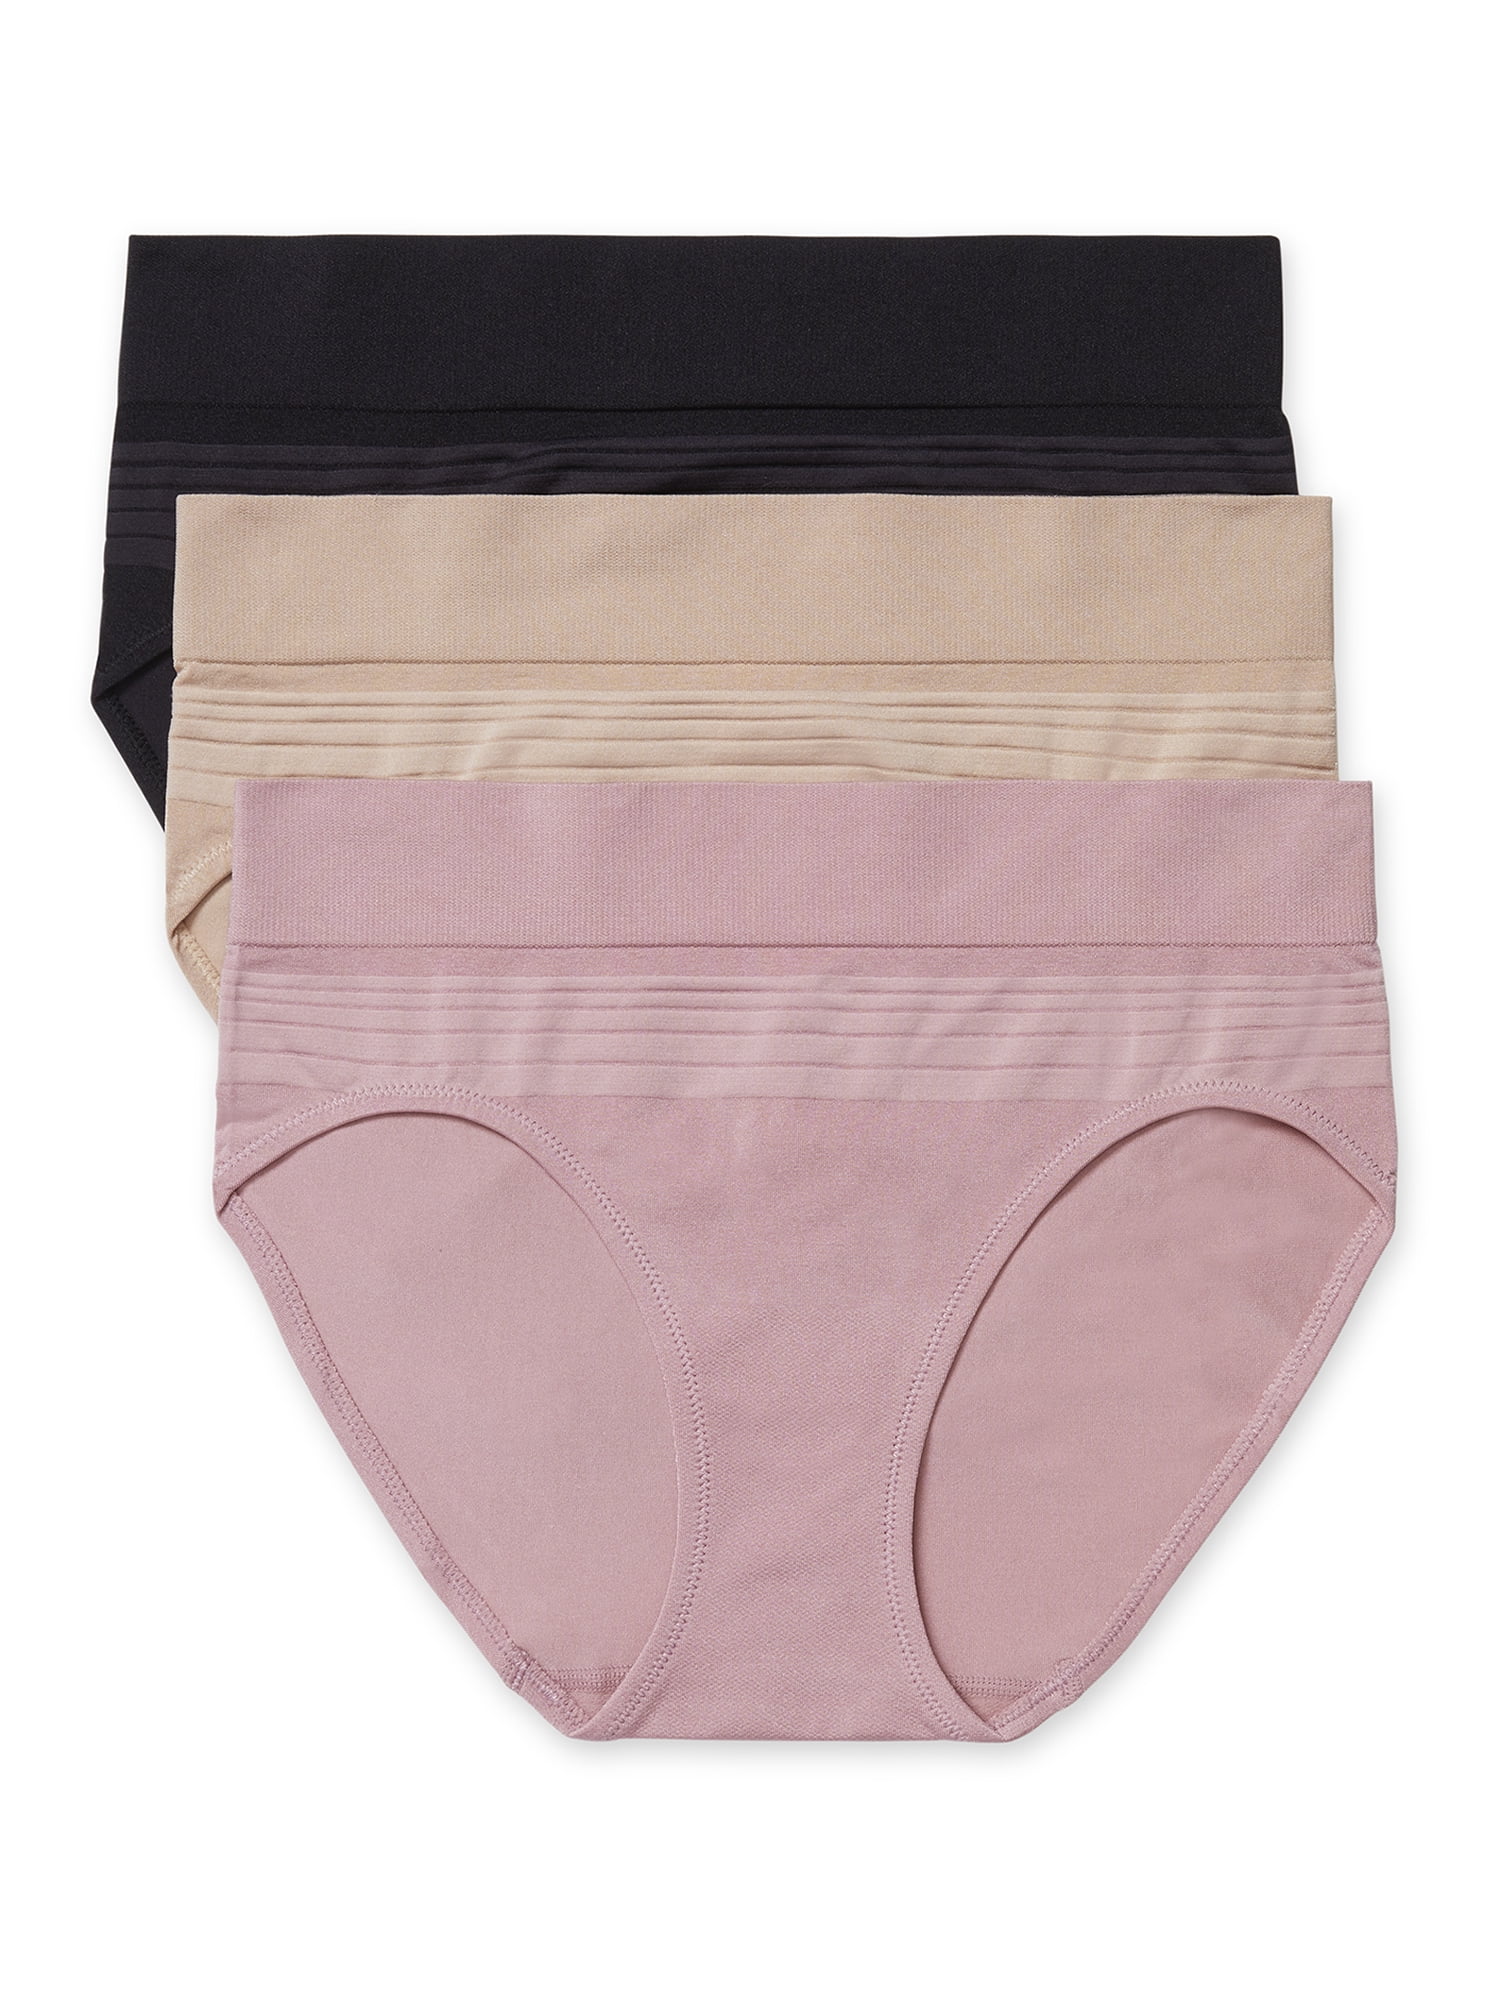 Penneys restocked the comfiest bargain seamless underwear sets - the  perfect dupe for high-end brands - RSVP Live